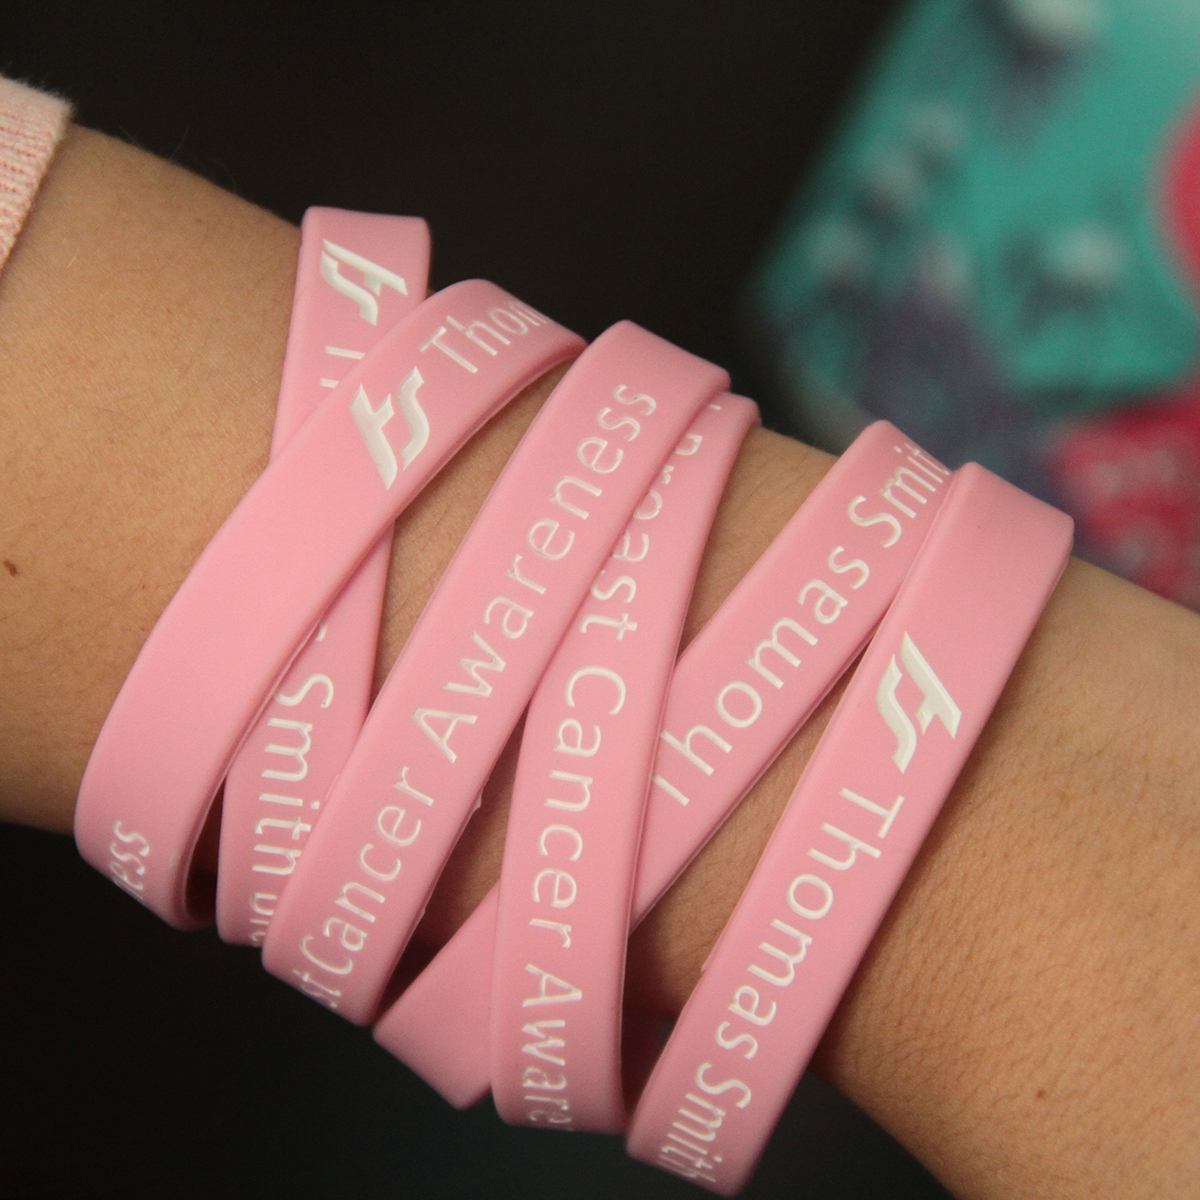 breast cancer awareness bracelets sold at thomas smith malta